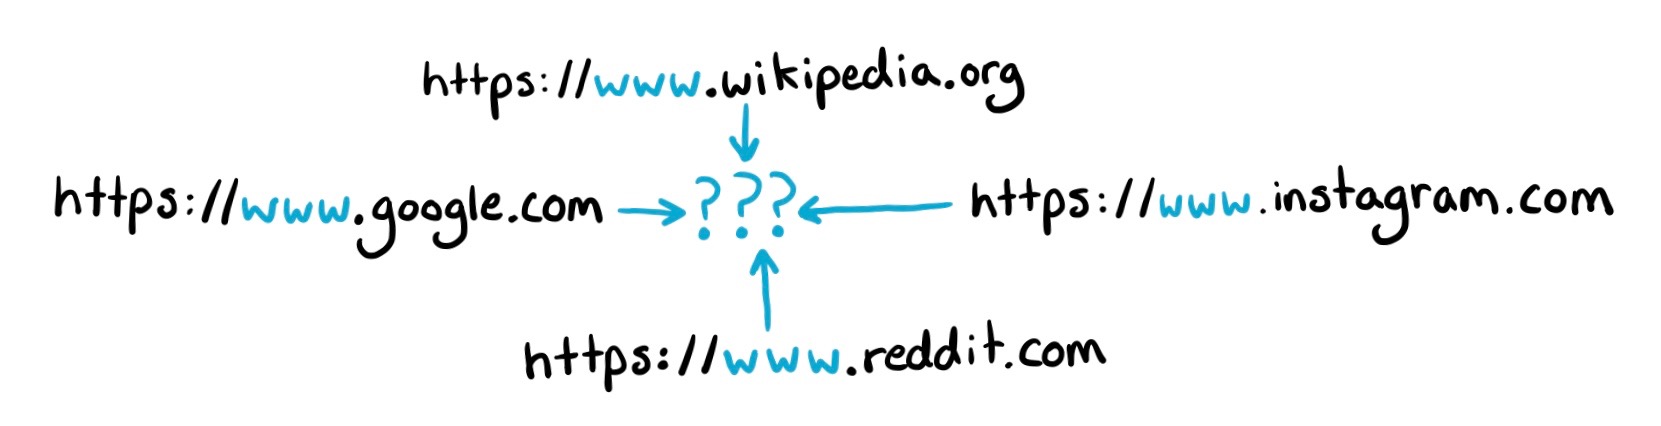 Various website URL's with the www portion highlighted surrounding a question mark